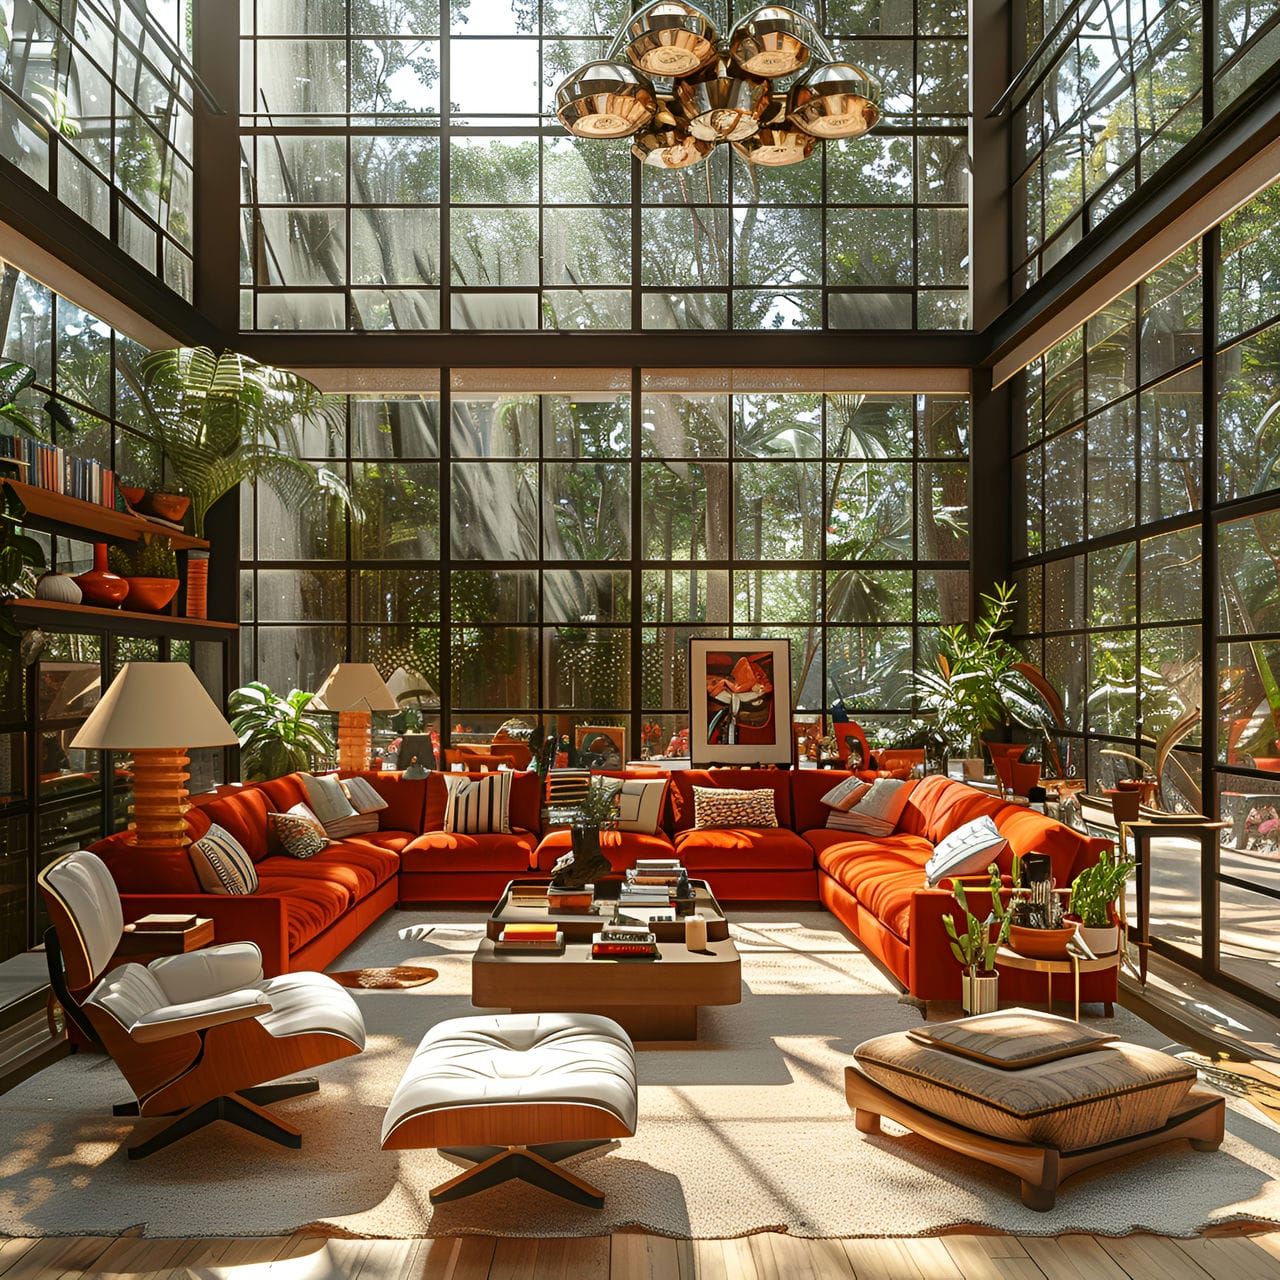 Conservatory: size, functionality, uses, furniture, and renovation